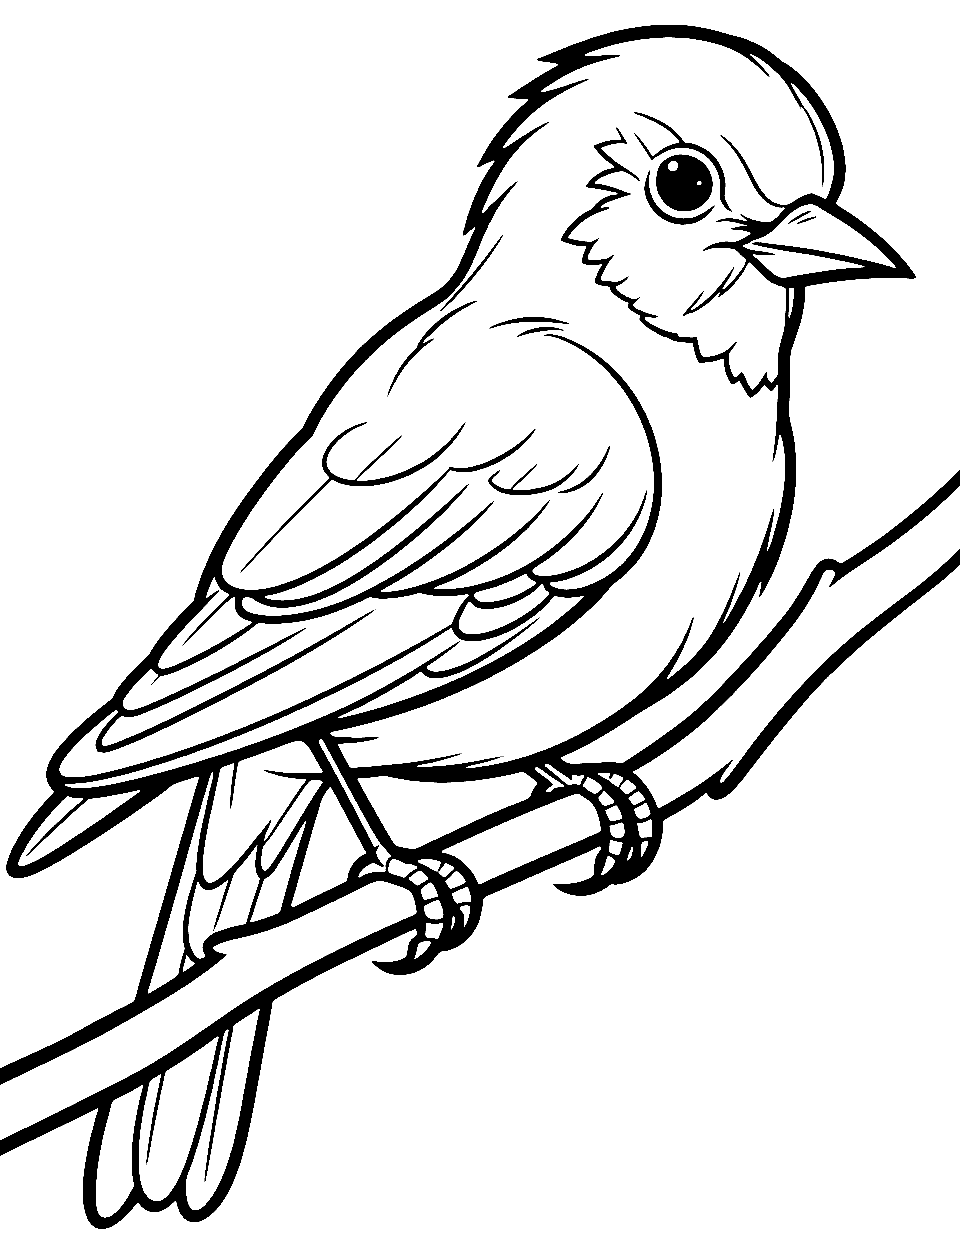 138 Bird Coloring Pages (Free PDF Printables) - Simply Love Coloring